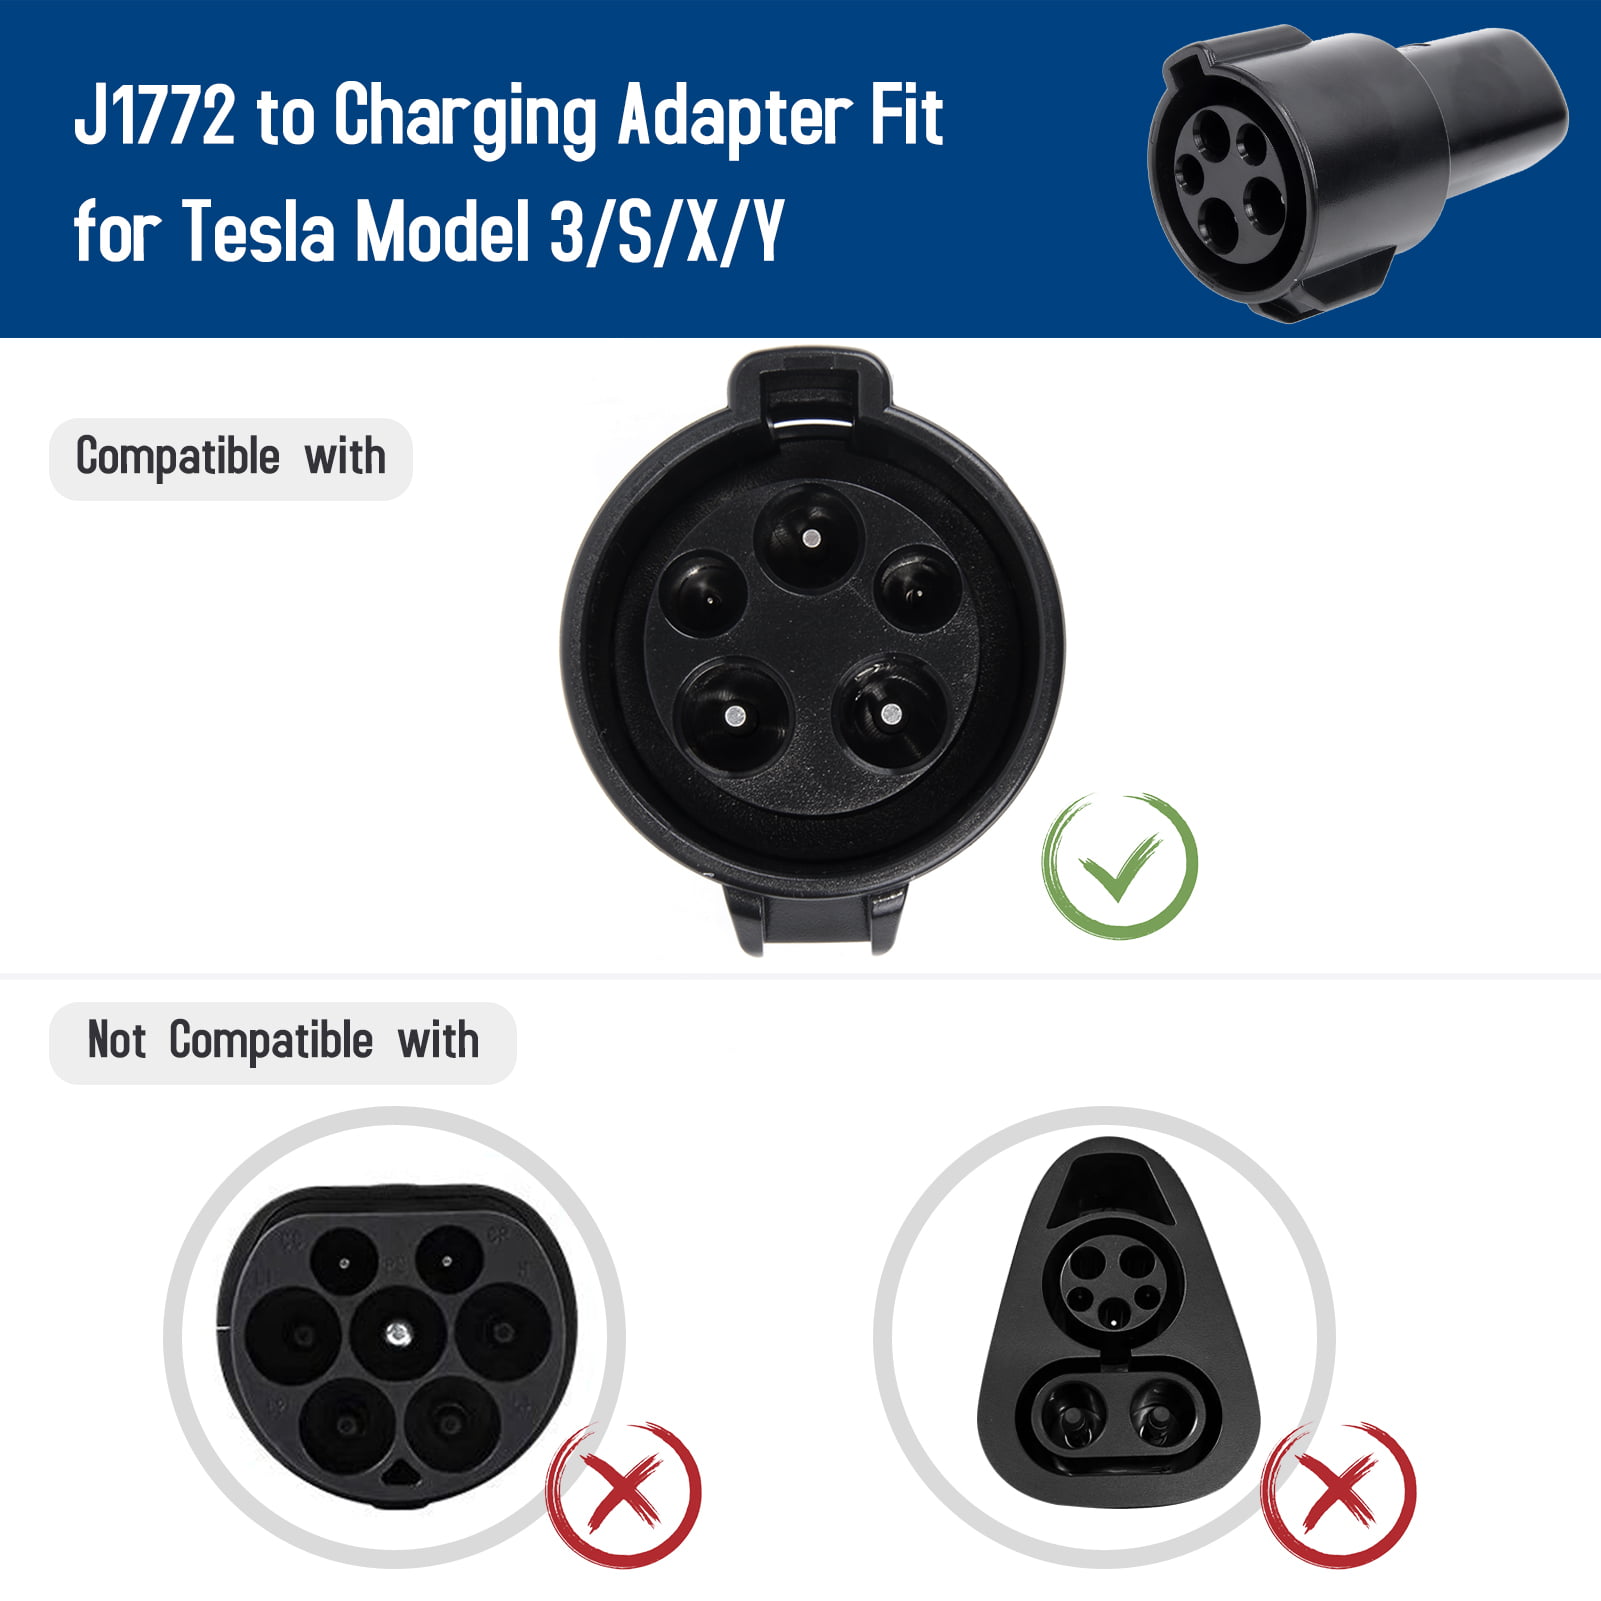 Aumotop J1772 to Charging Adapter Fit for Tesla Model 3SXY, 80